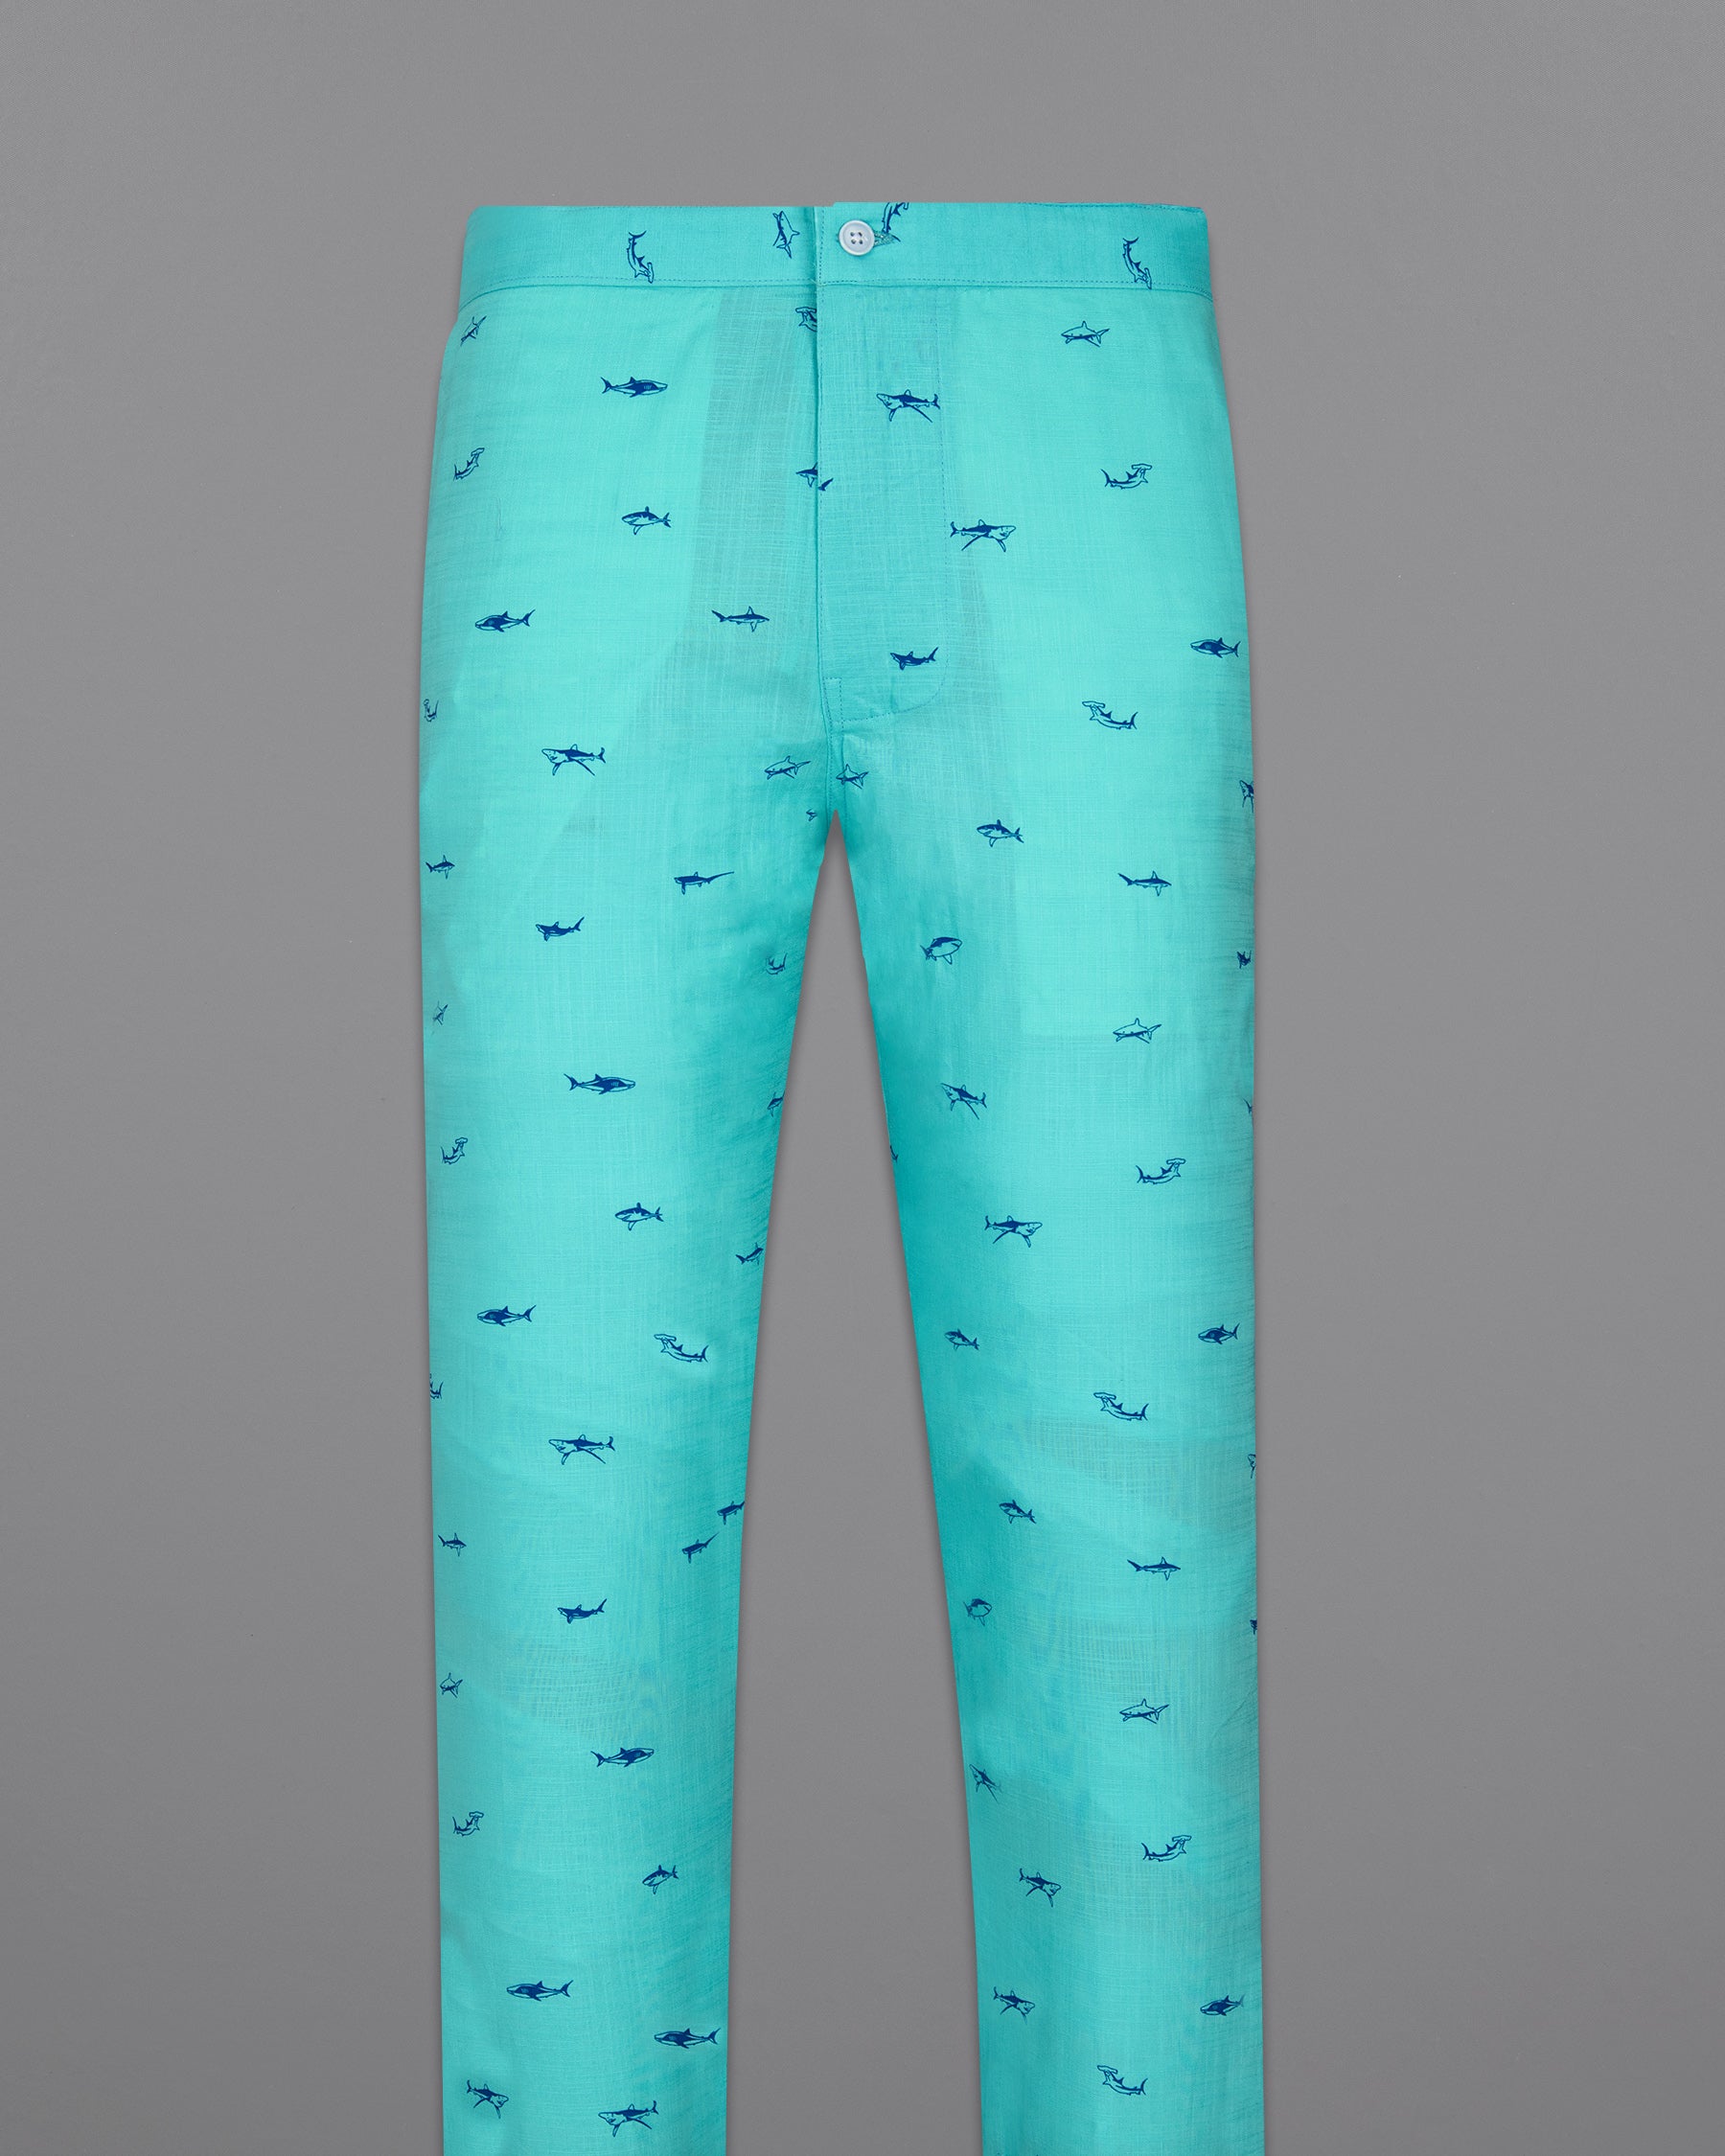 Bright Turquoise Shark Printed Luxurious Linen Lounge Pant LP157-28, LP157-30, LP157-32, LP157-34, LP157-36, LP157-38, LP157-40, LP157-42, LP157-44